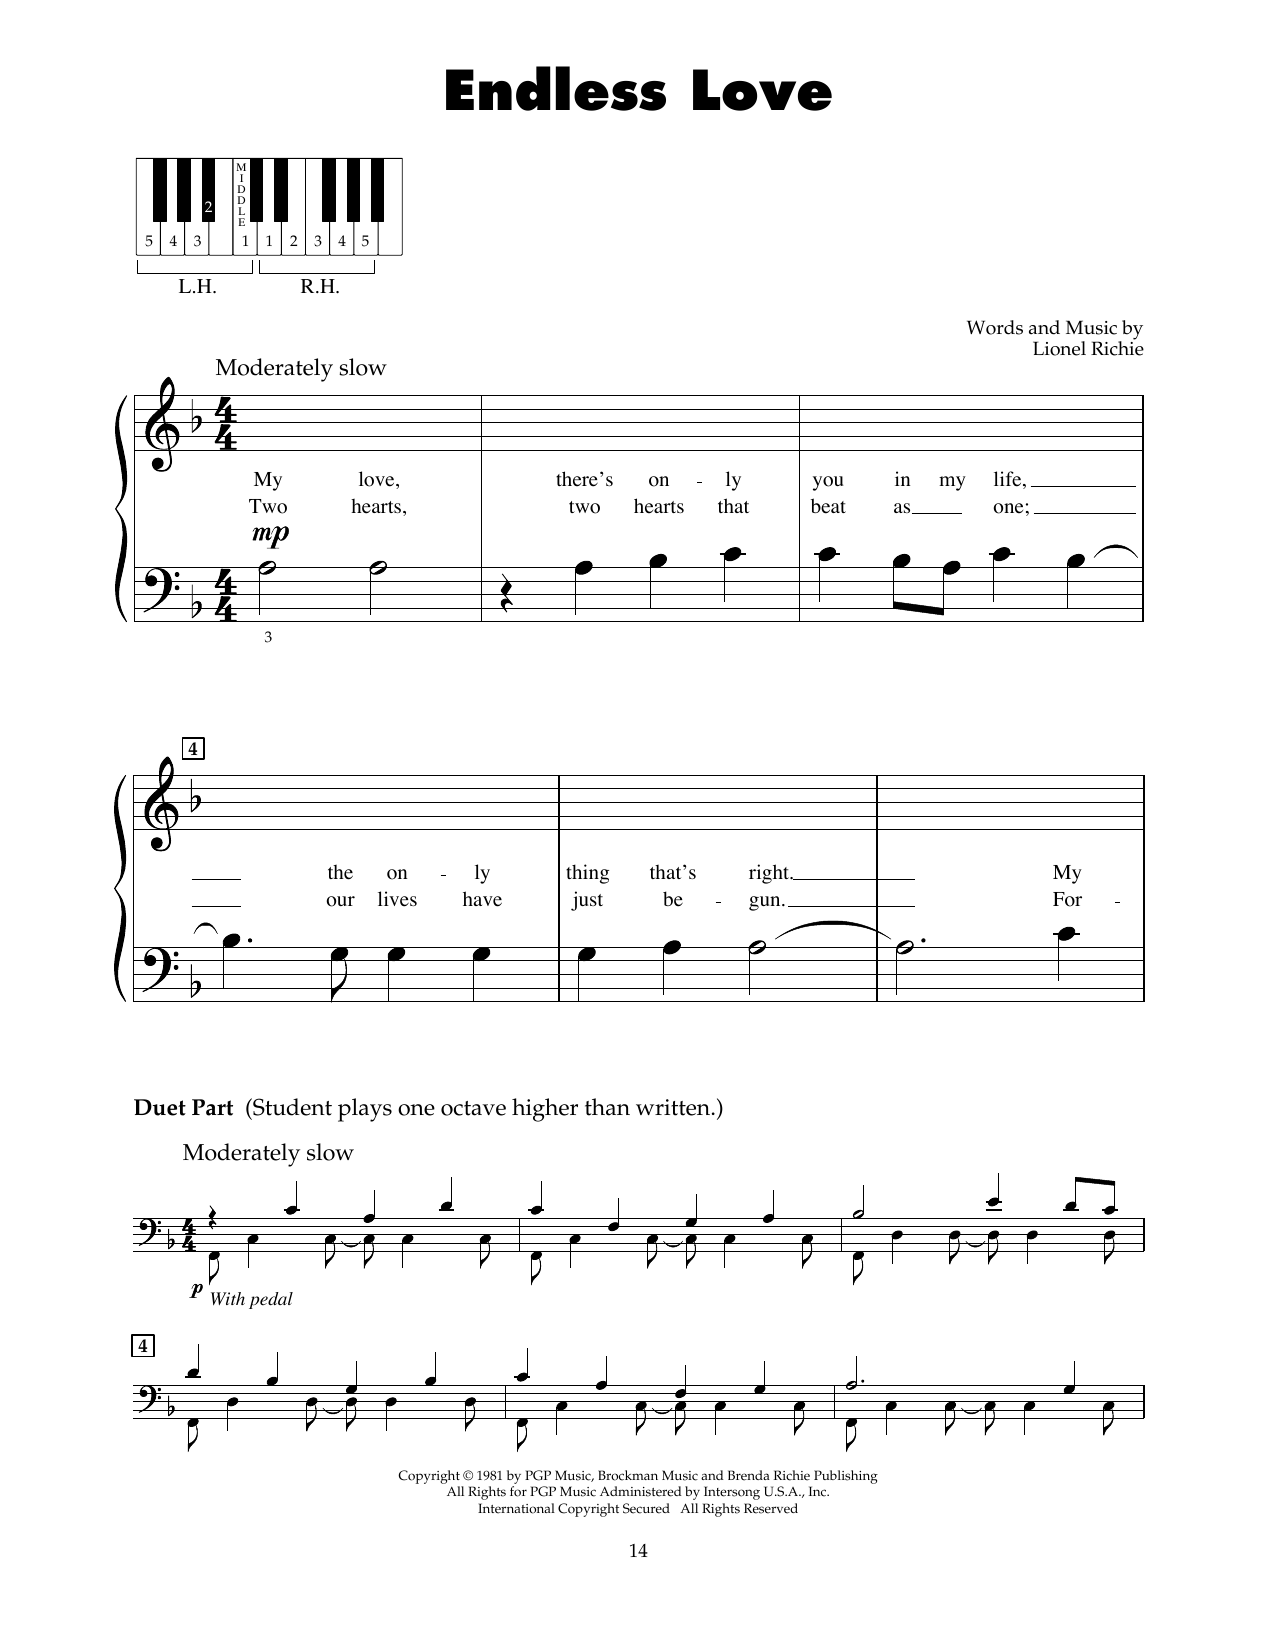 Download Diana Ross & Lionel Richie Endless Love Sheet Music